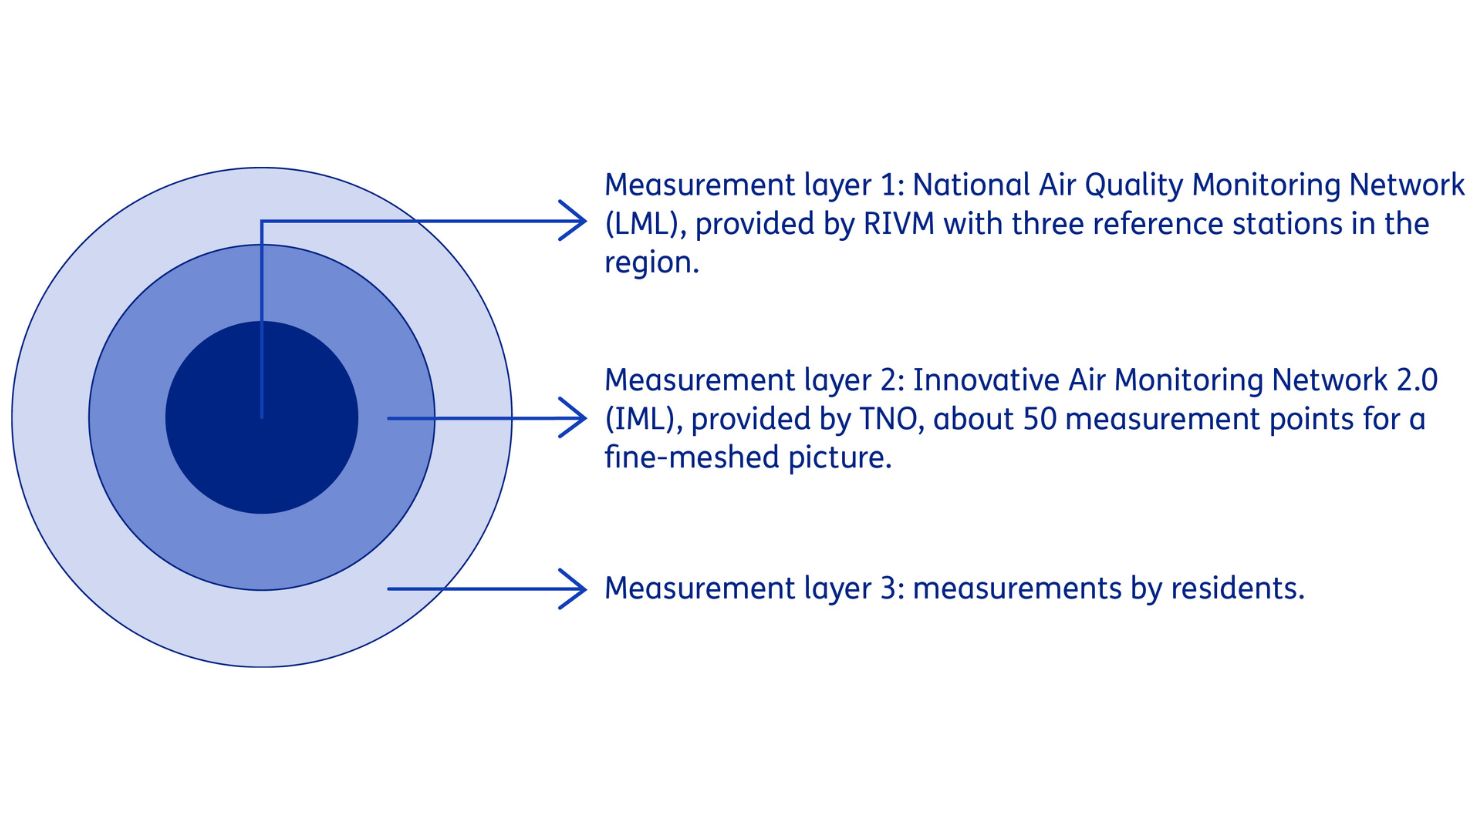 Three measurement layers of the National Air Quality Monitoring Network